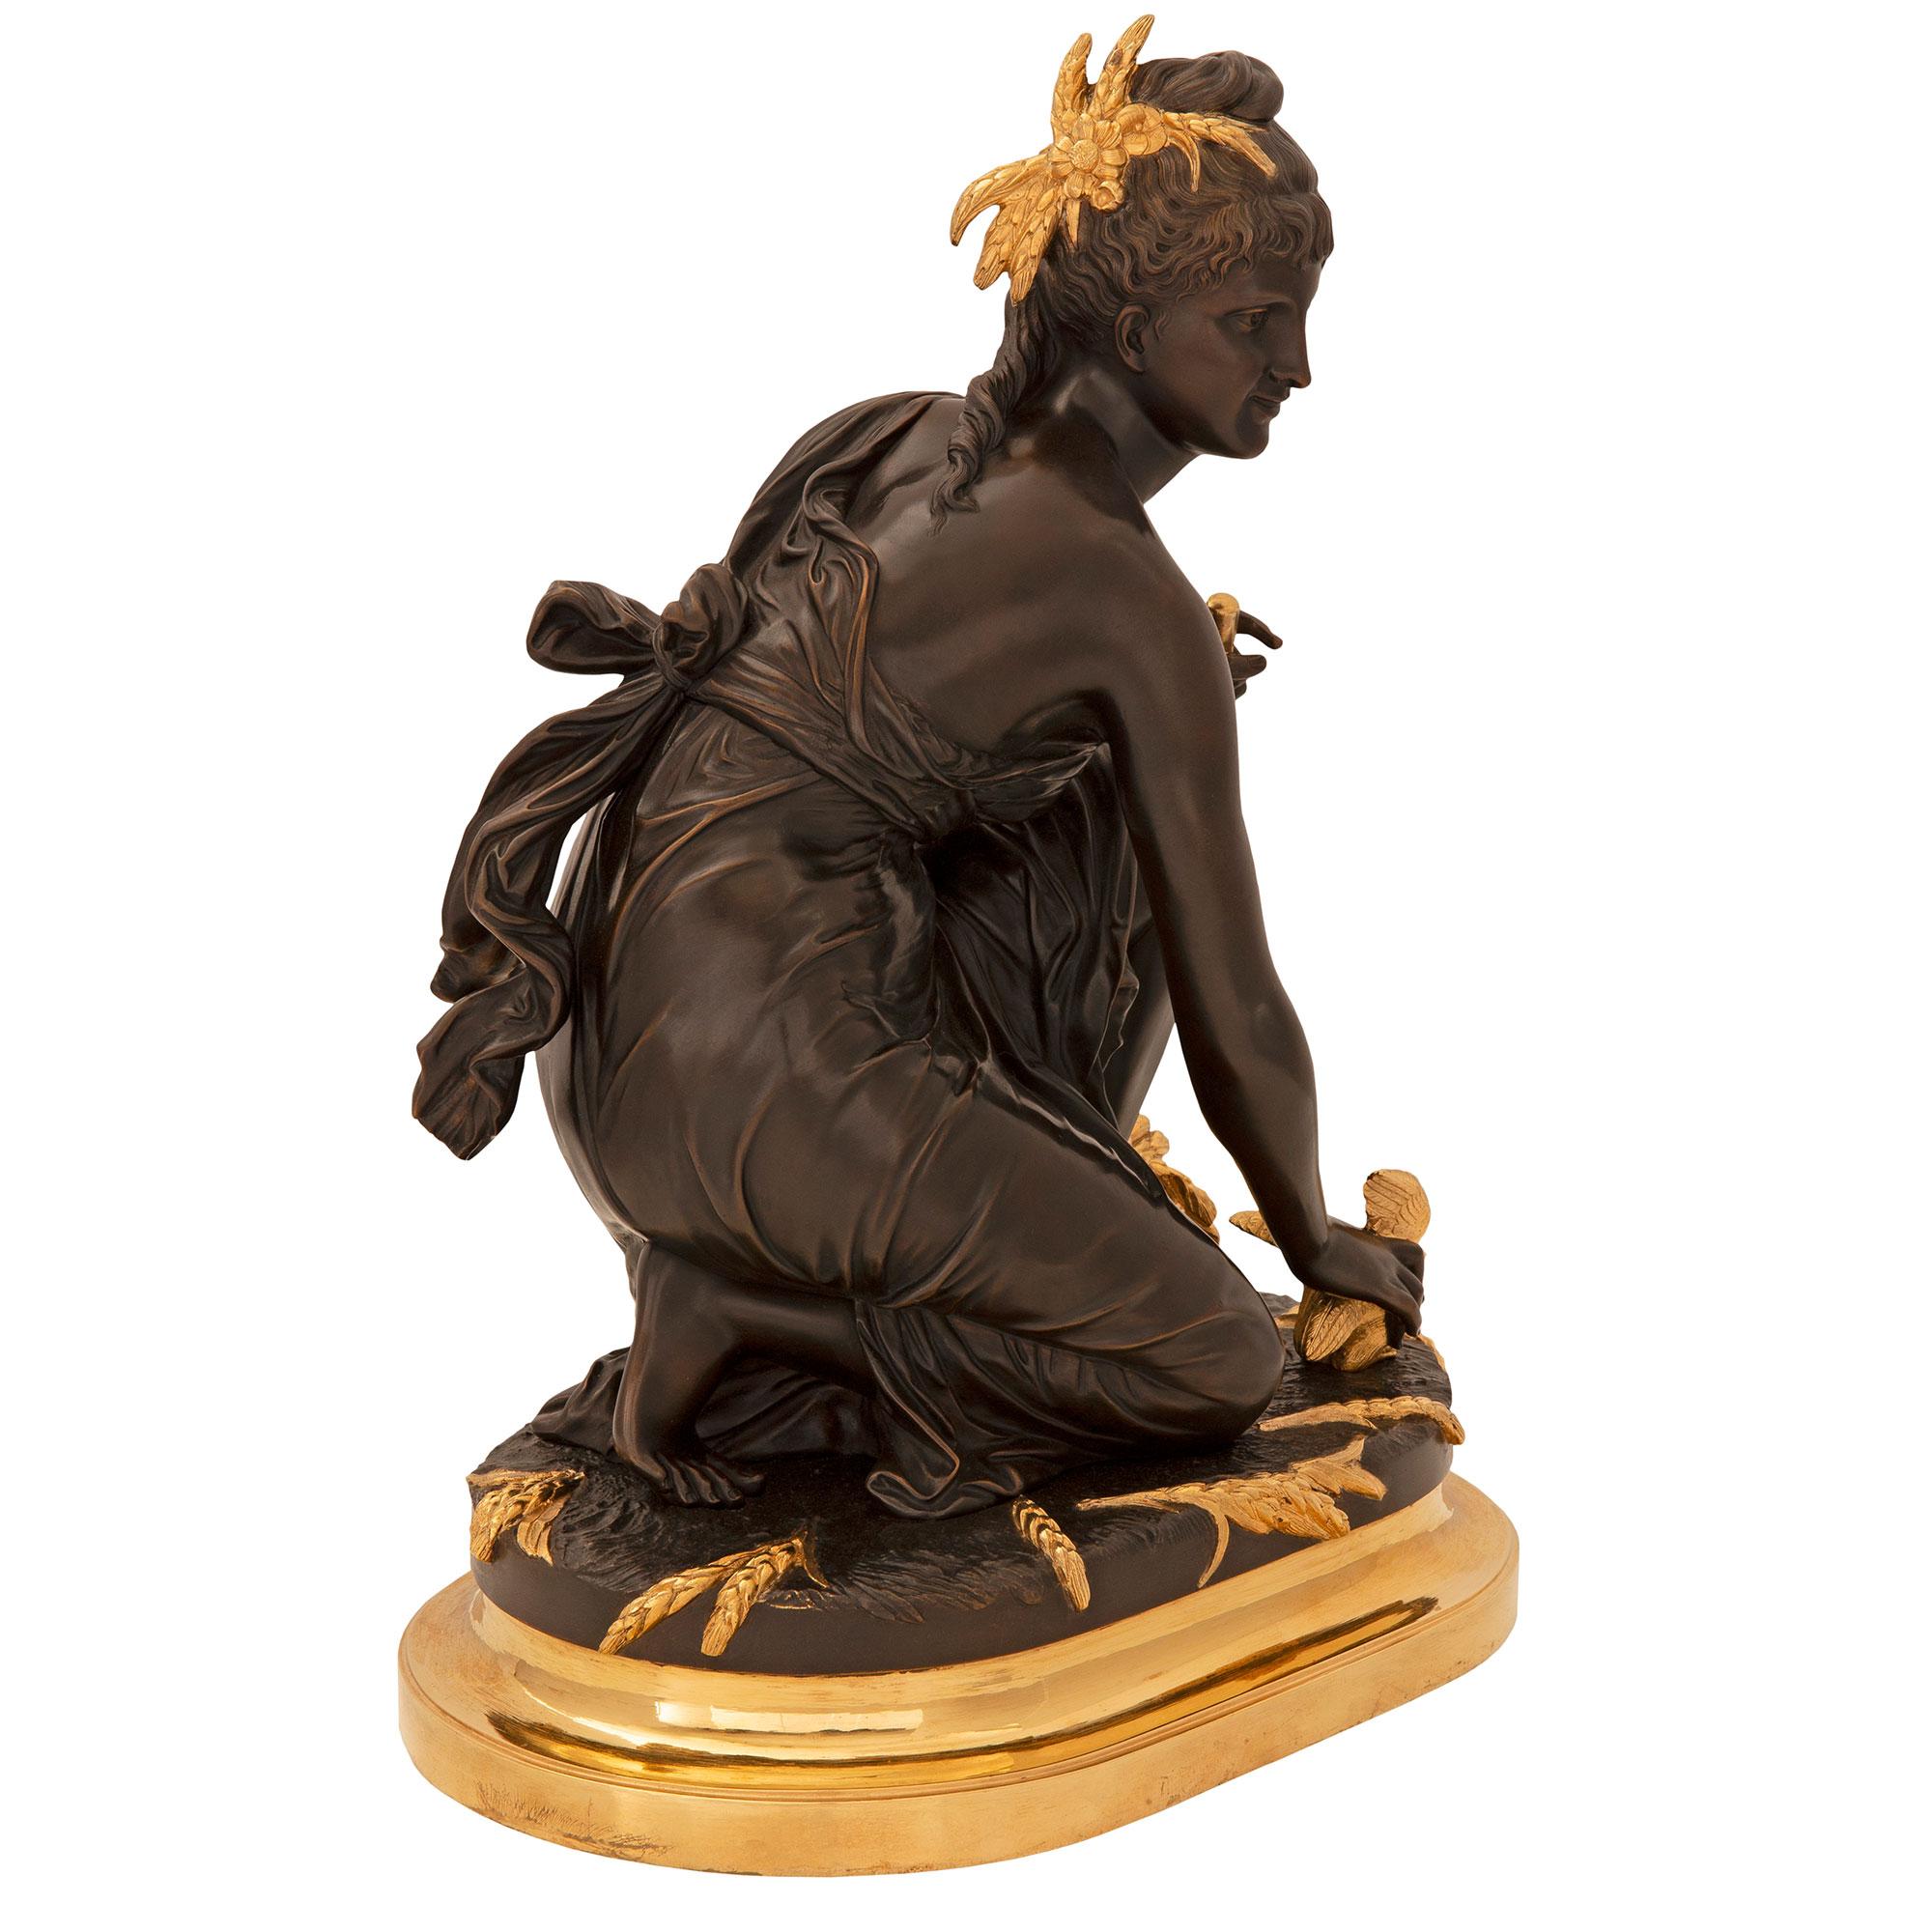 A striking and high quality French 19th century Louis XVI st. ormolu and patinated bronze statue, signed E. Laurent. The statue is raised by an elegant oblong shaped ormolu base with a fine mottled border. Above is a beautiful maiden kneeling on a